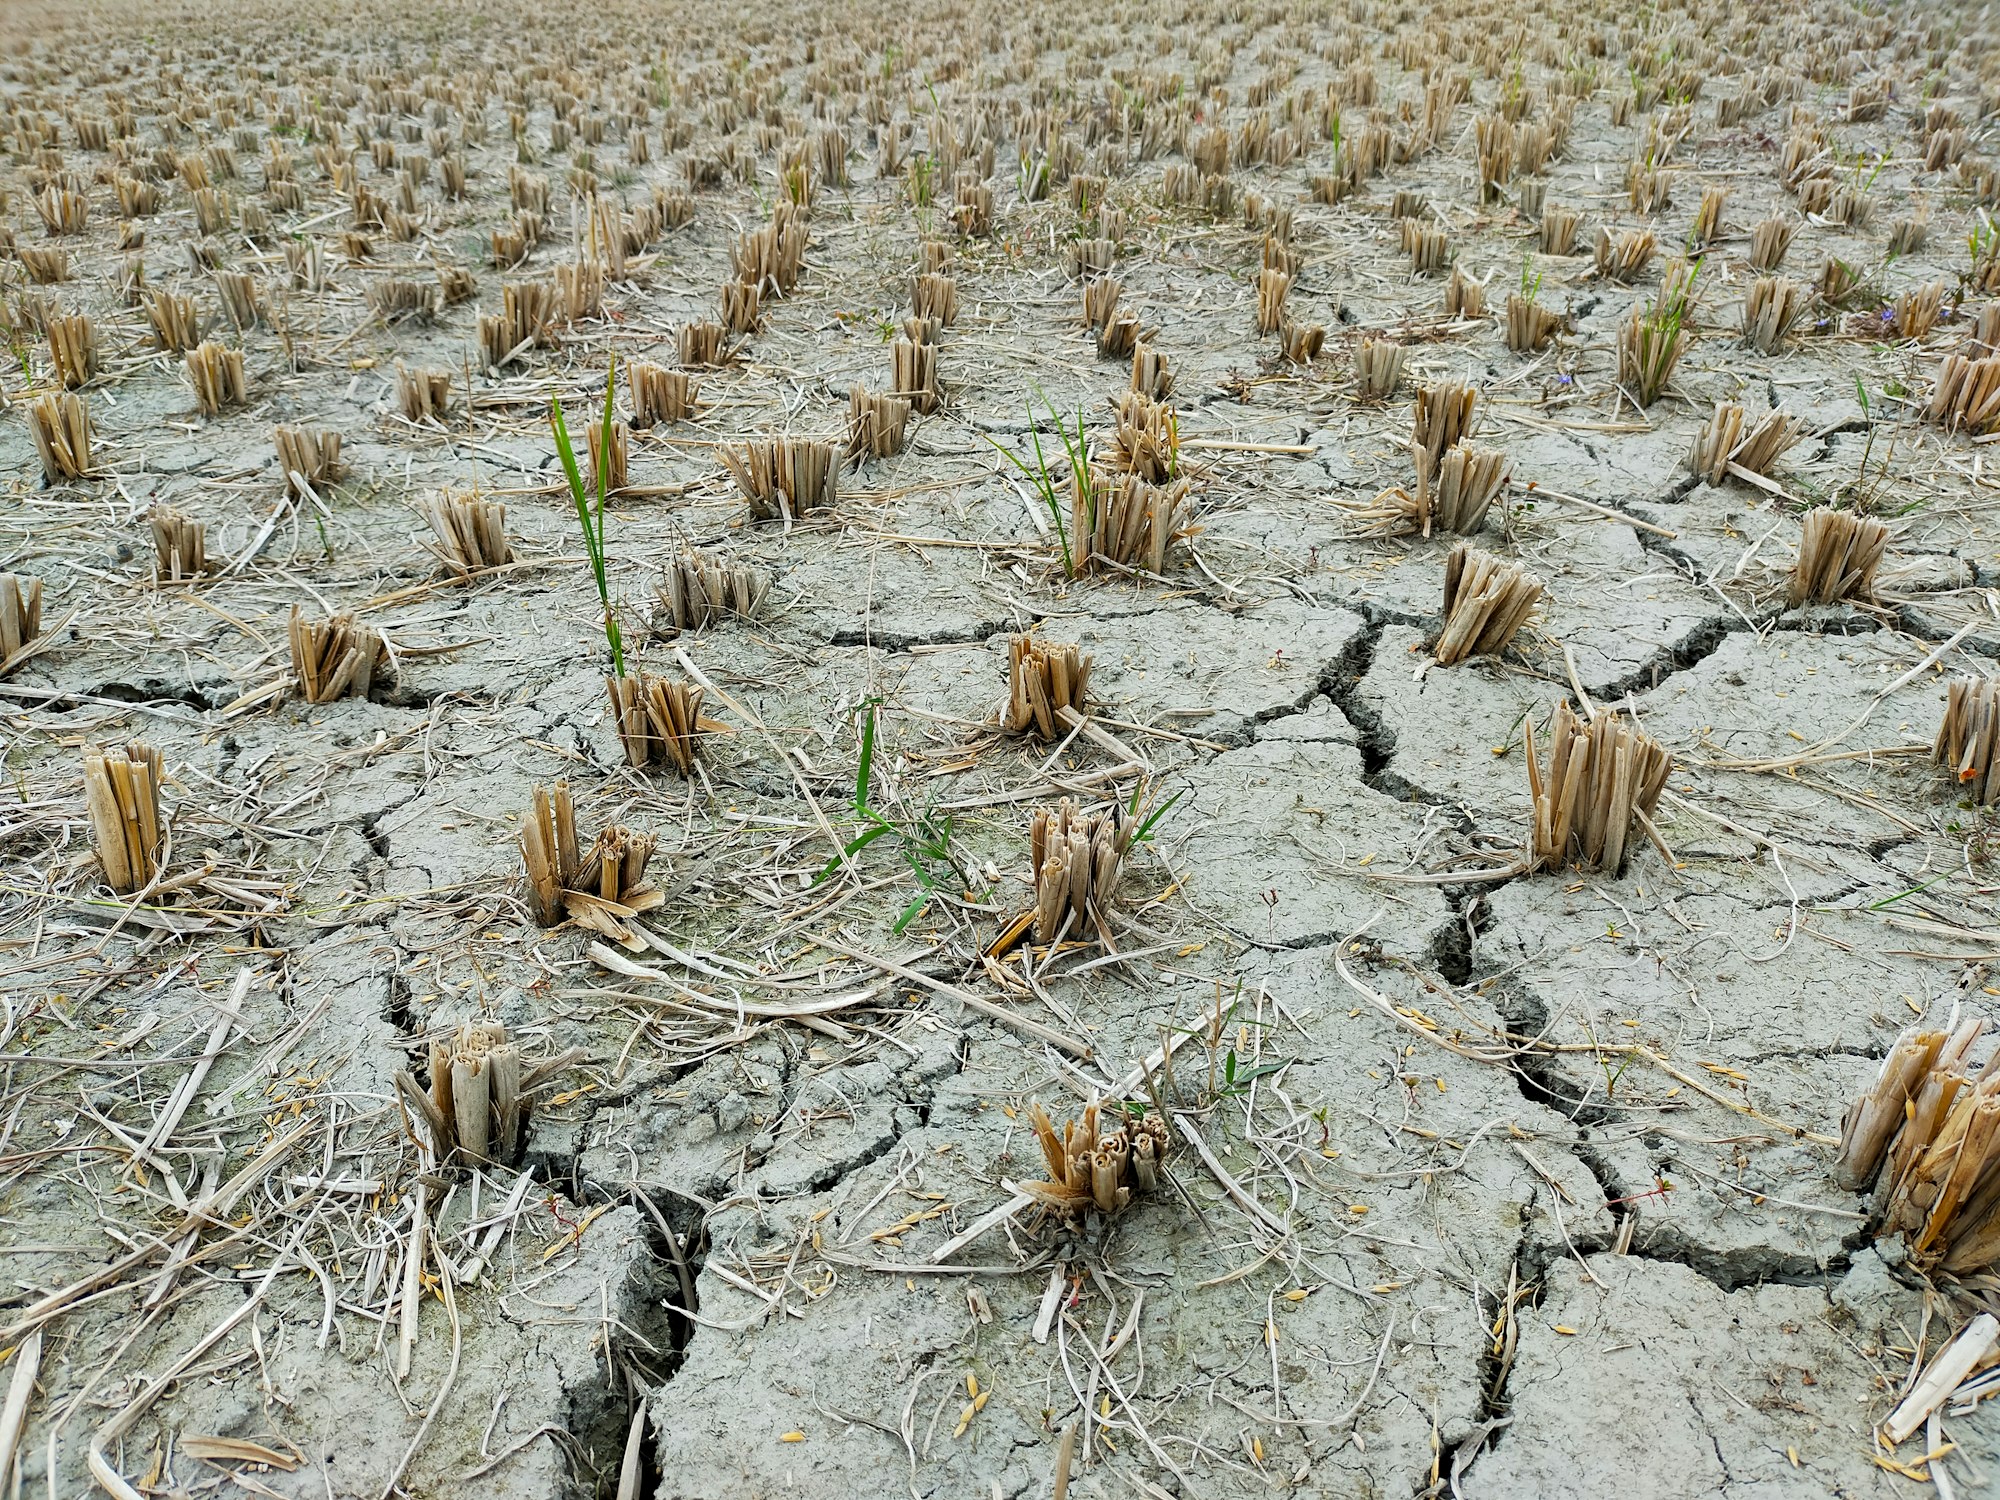 European Parliament Publishes Report on the Impacts of Climate Change on Agriculture